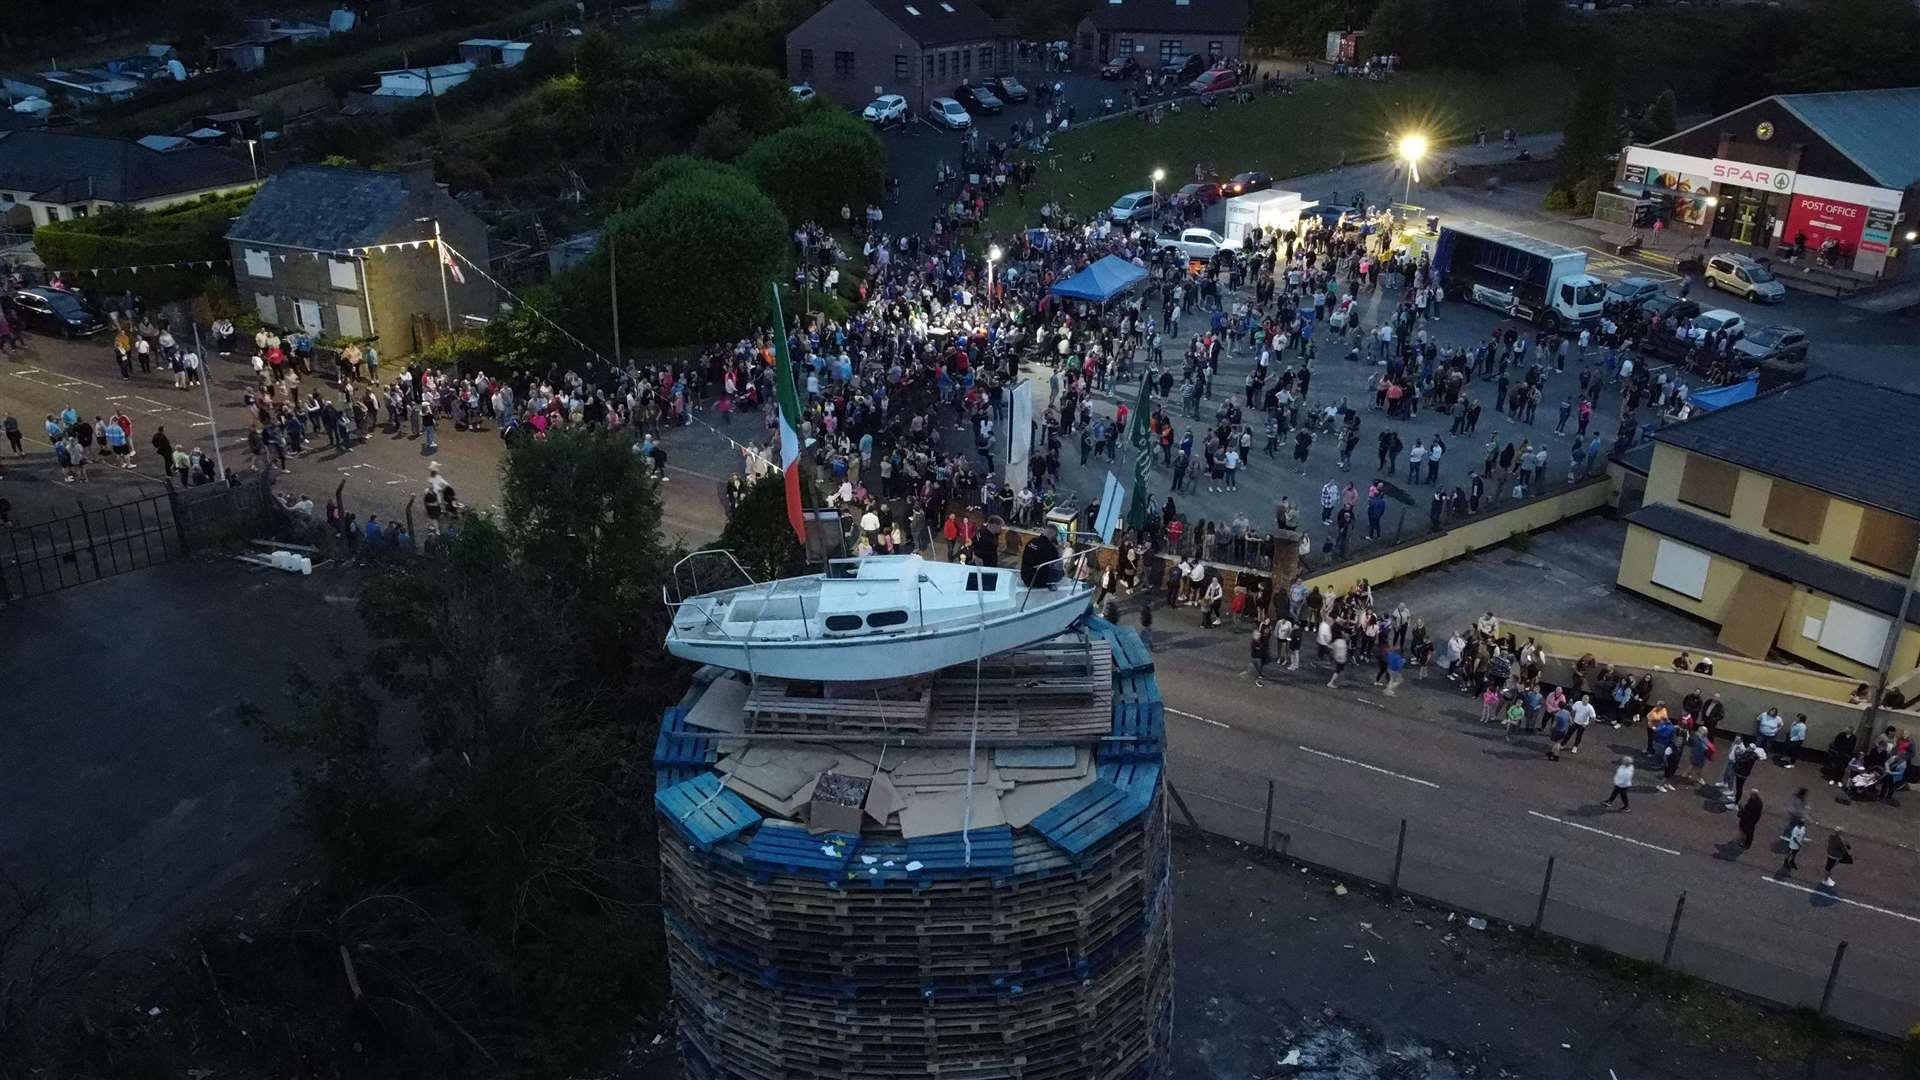 People watch as the pyre with a boat on top is lit (Niall Carson/P)A